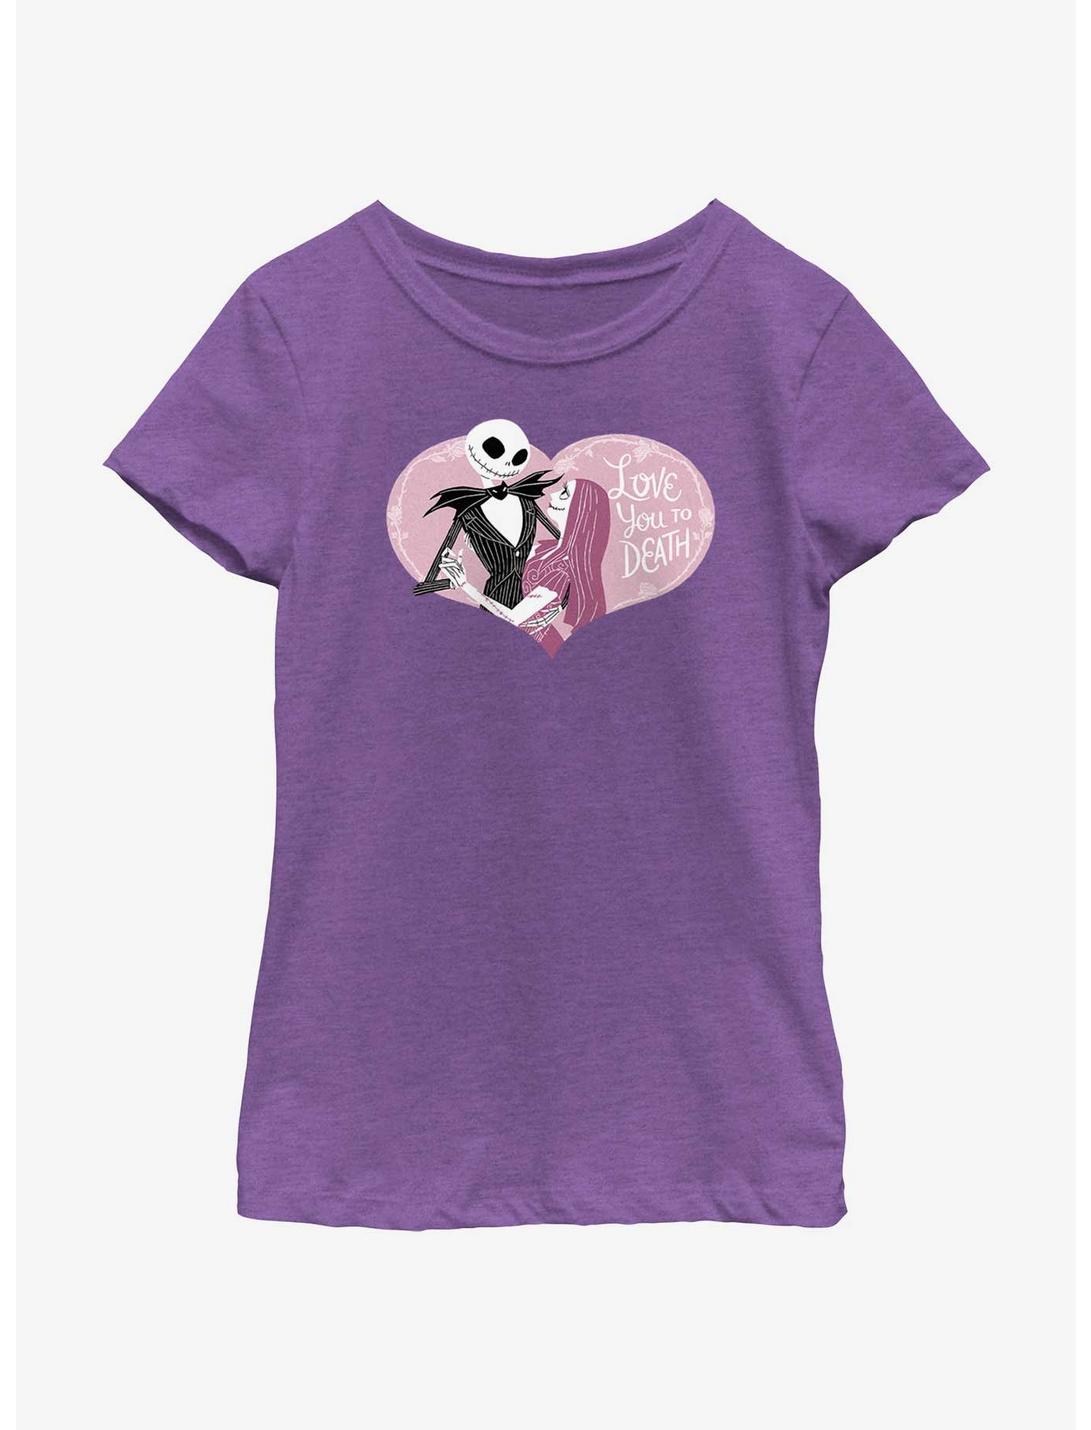 Disney Nightmare Before Christmas Love You To Death Youth Girls T-Shirt, PURPLE BERRY, hi-res